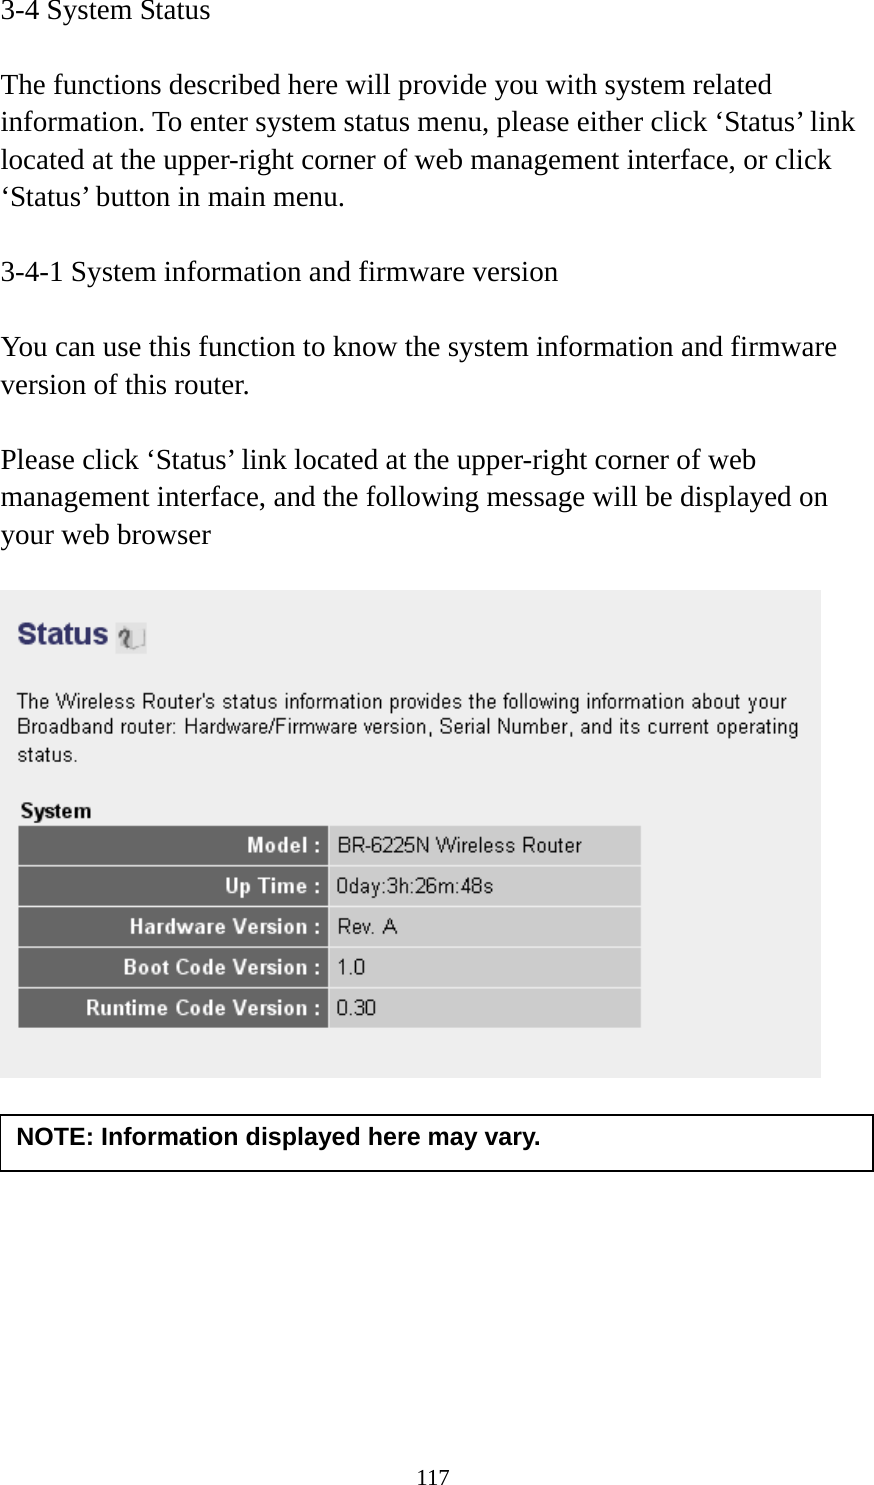 117 3-4 System Status  The functions described here will provide you with system related information. To enter system status menu, please either click ‘Status’ link located at the upper-right corner of web management interface, or click ‘Status’ button in main menu.  3-4-1 System information and firmware version  You can use this function to know the system information and firmware version of this router.  Please click ‘Status’ link located at the upper-right corner of web management interface, and the following message will be displayed on your web browser            NOTE: Information displayed here may vary. 